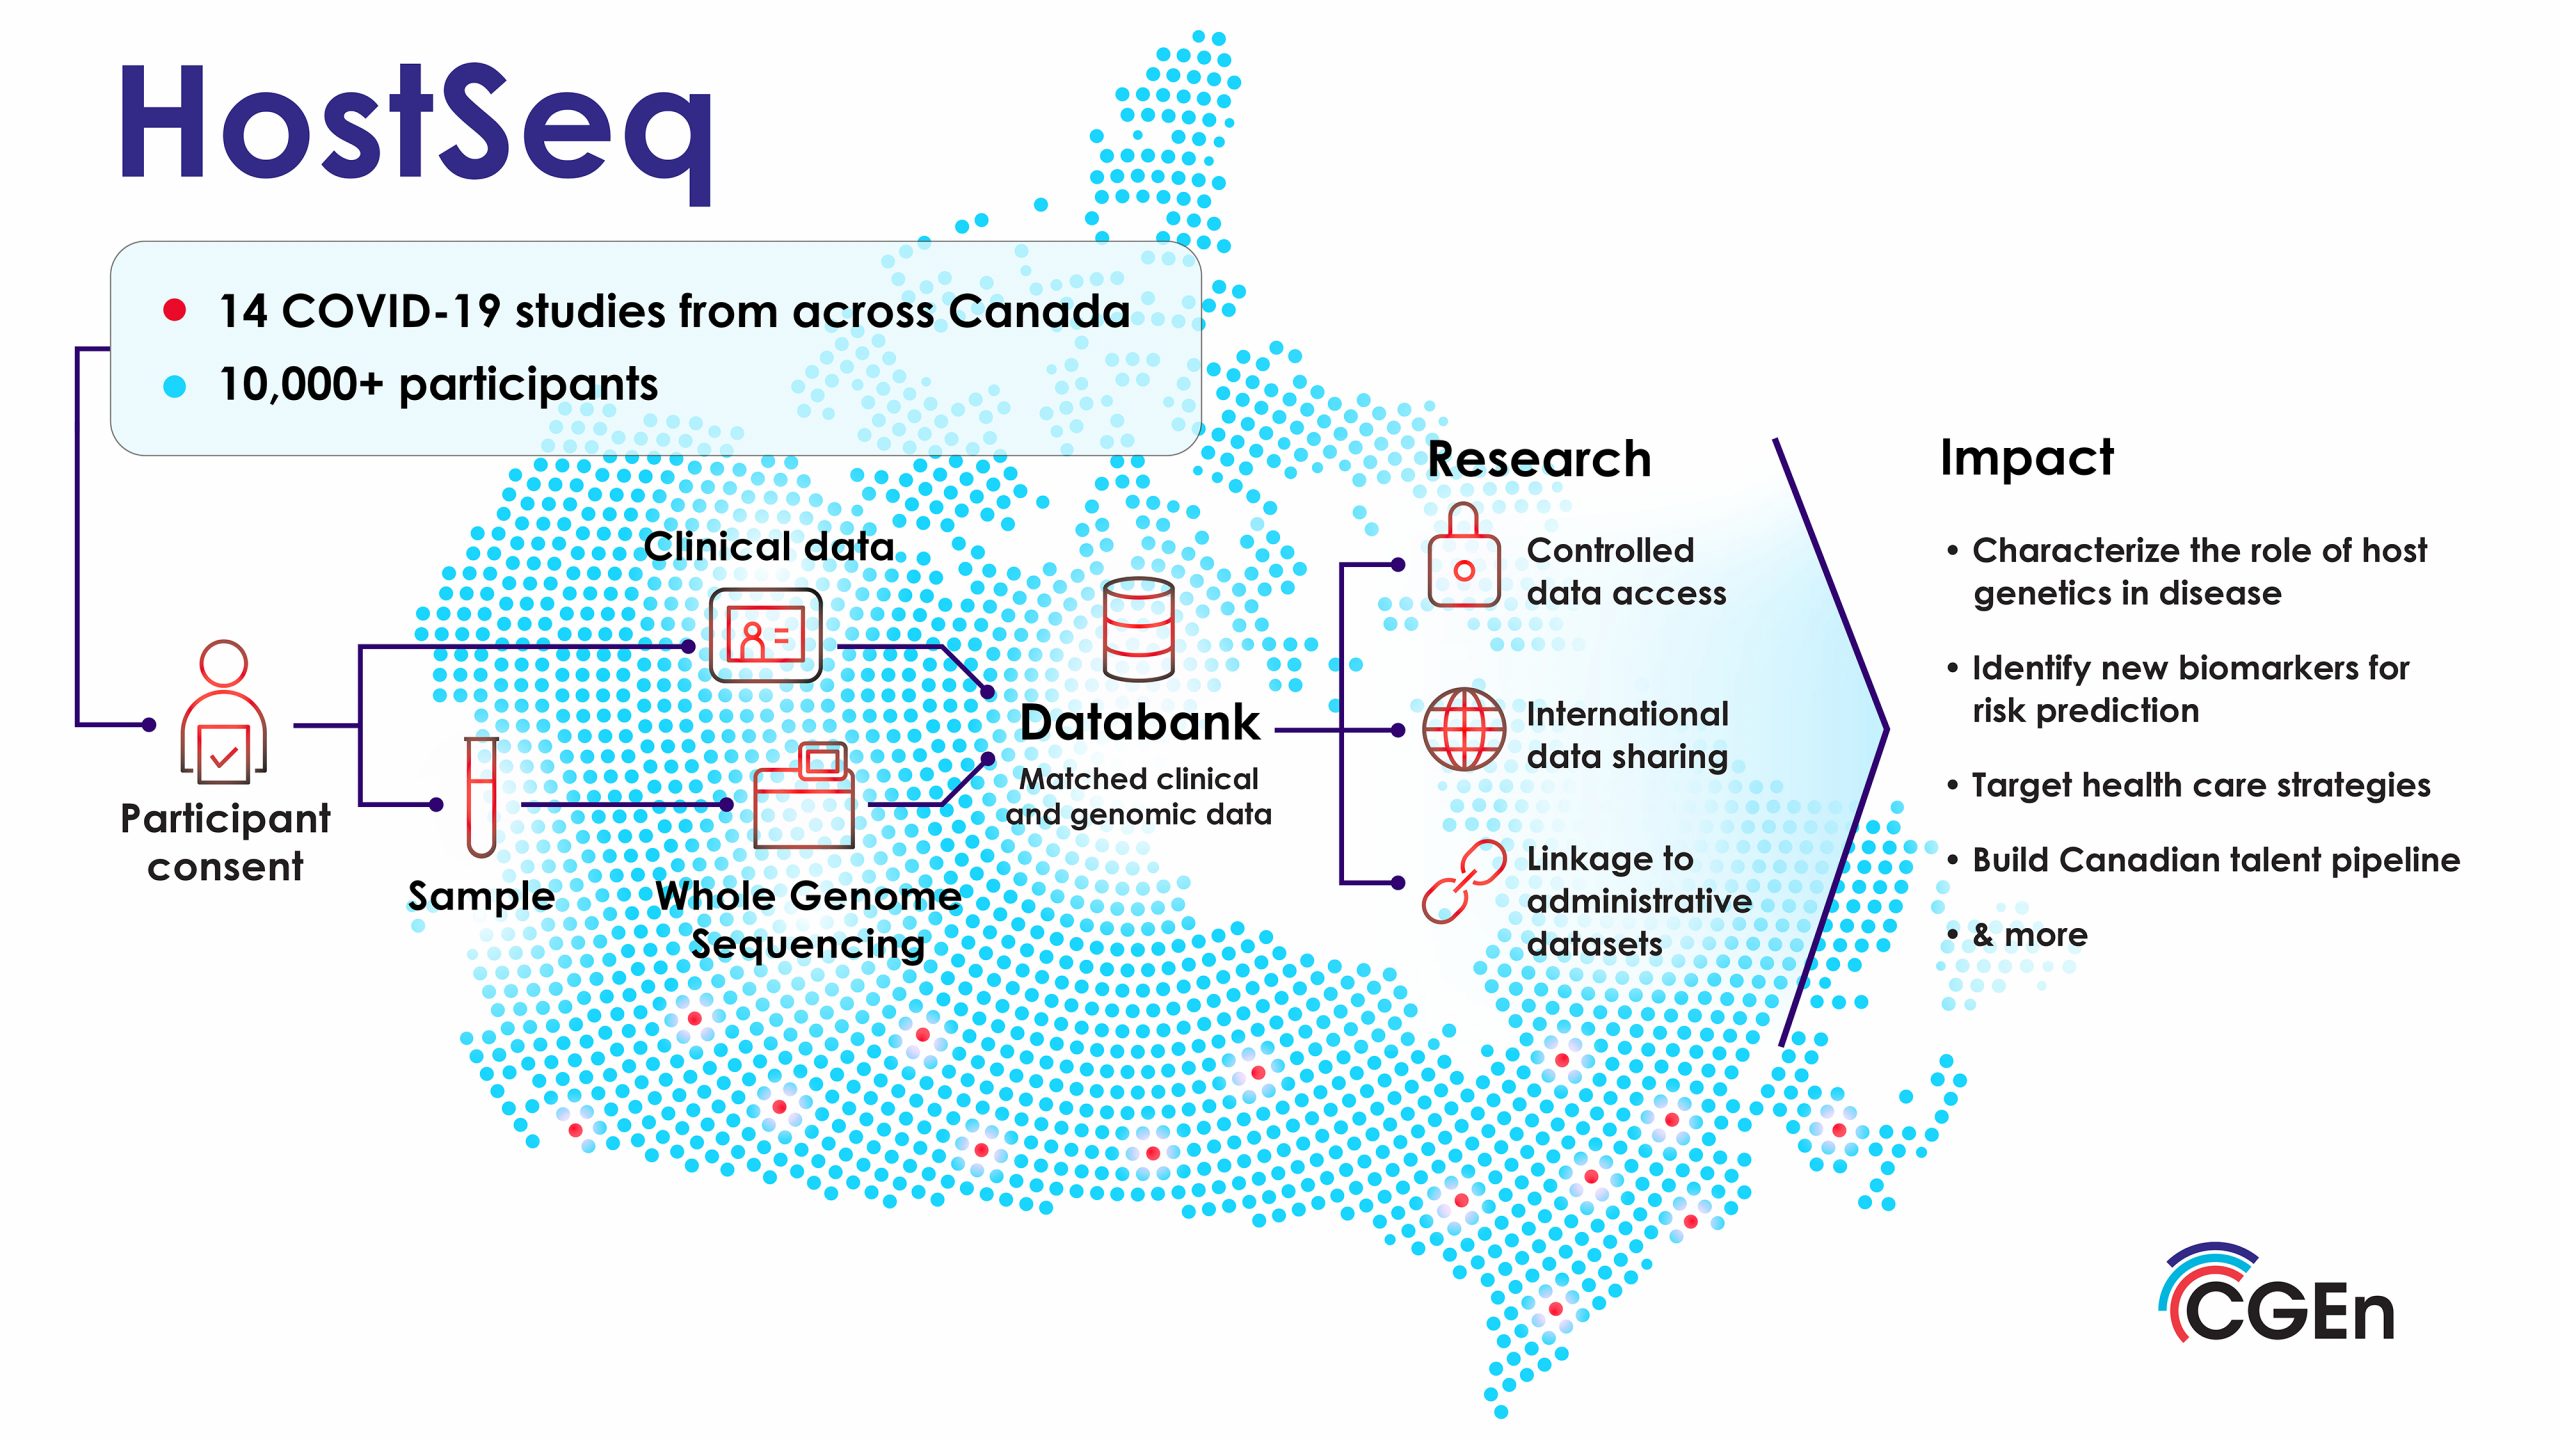 The COVID-19 Host Genome Sequencing project (HostSeq) is Canada’s largest national genomic databank to date containing genome sequences linked to medical and clinical data from 10,000 individuals affected by COVID-19